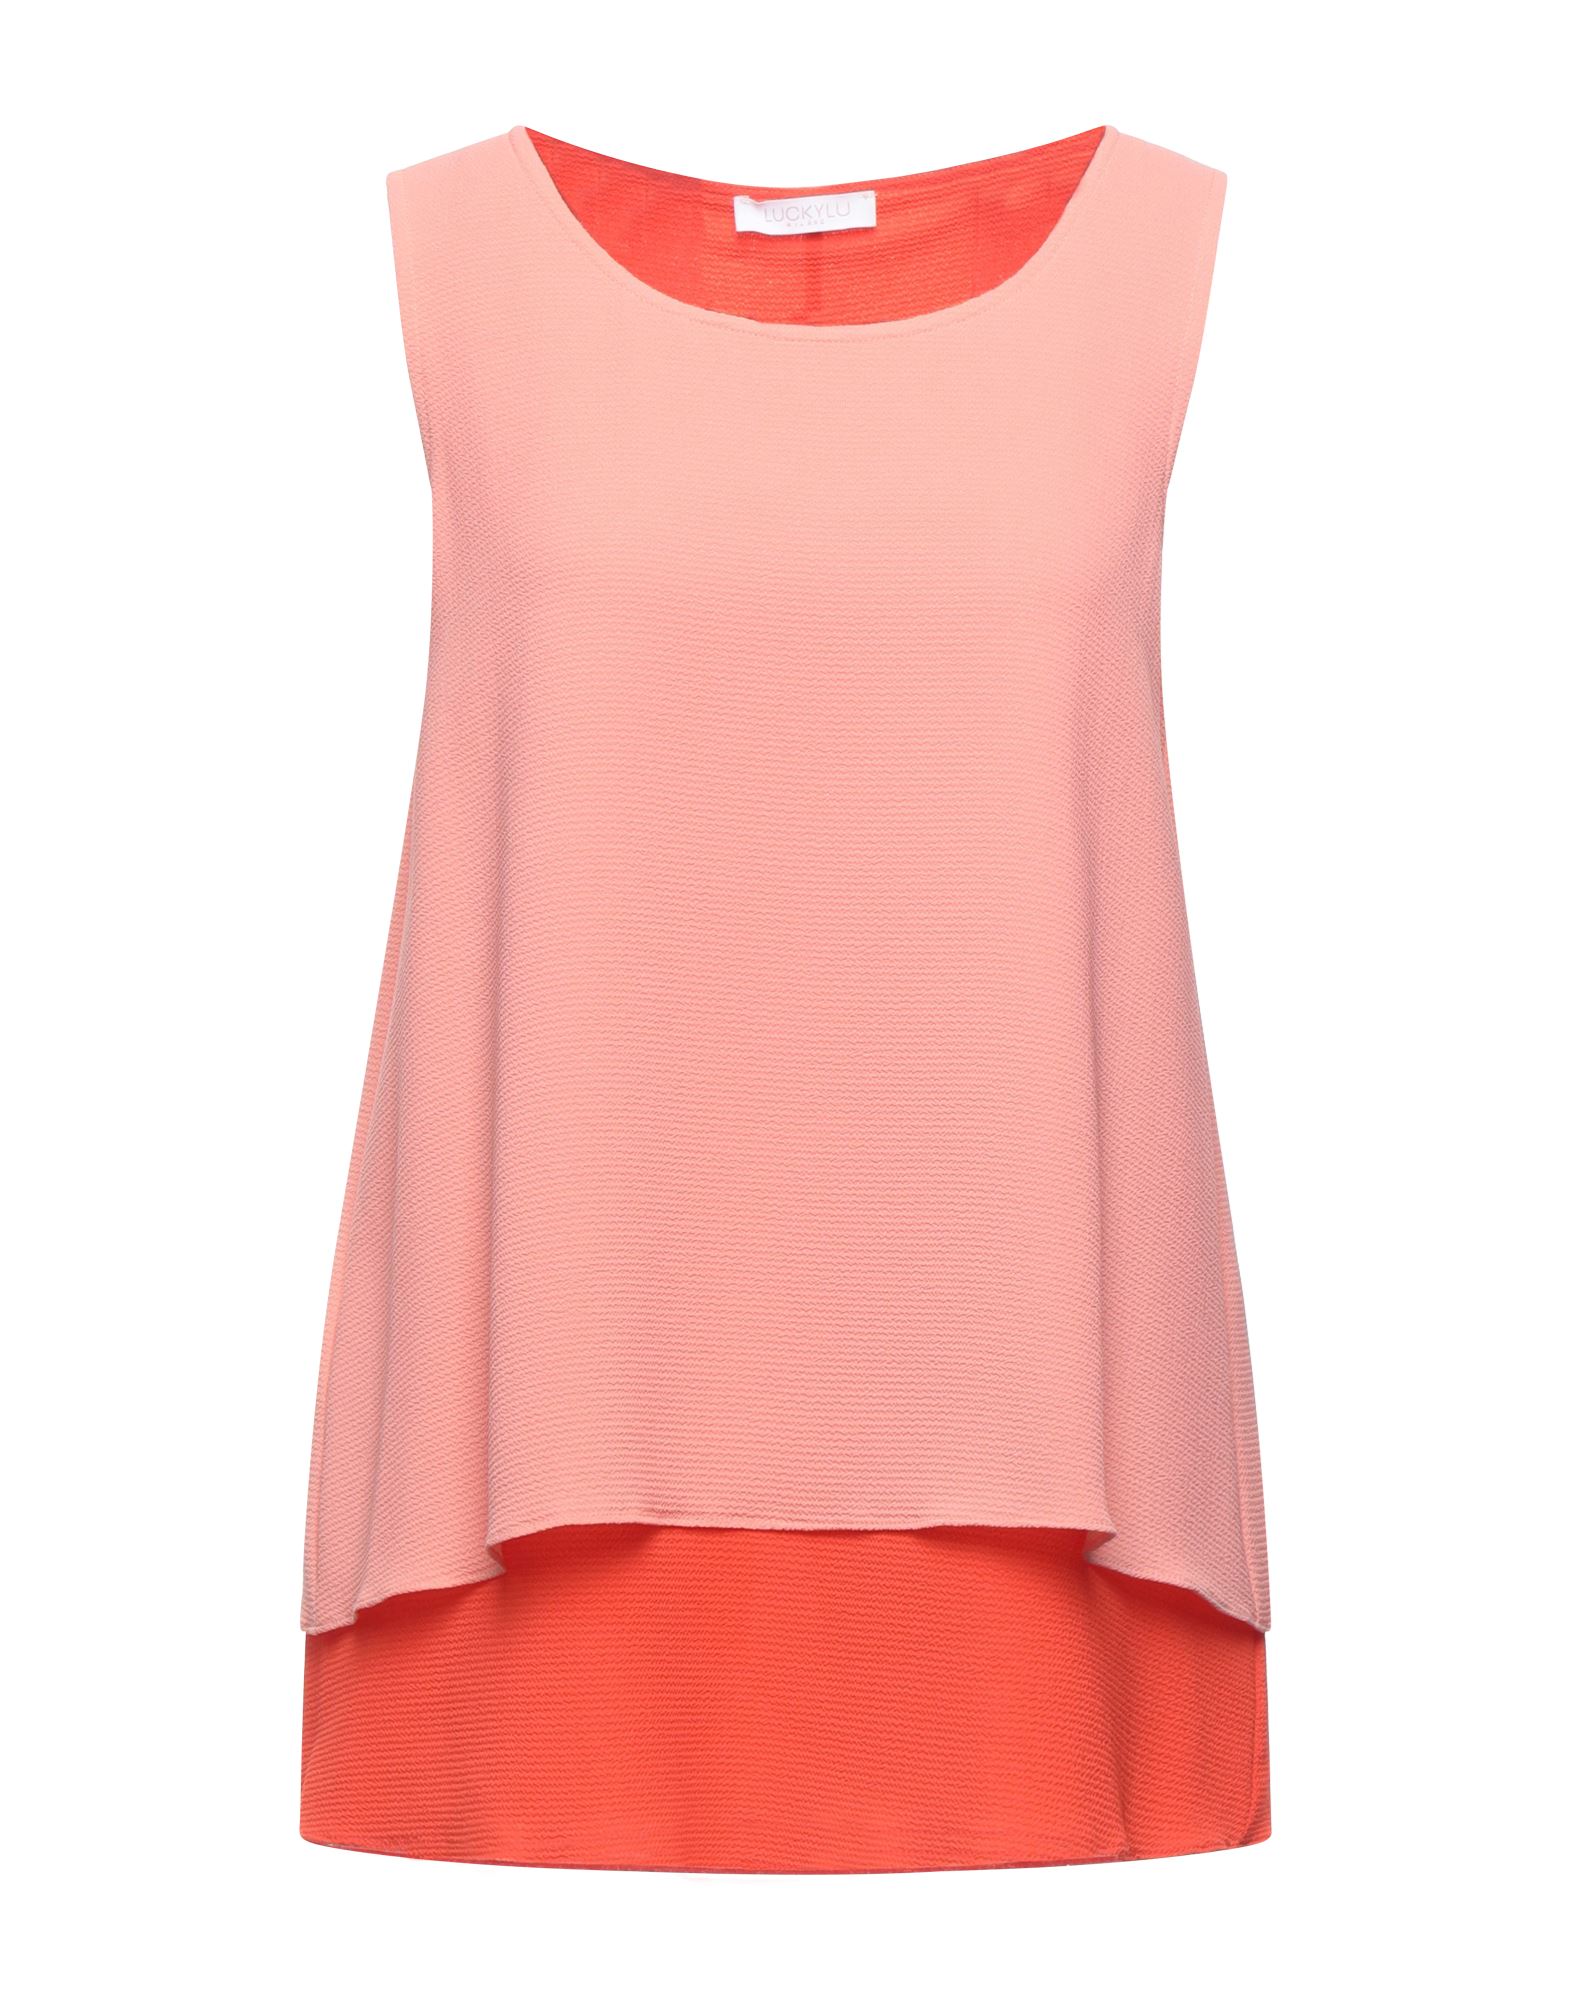 Tops In Salmon Pink